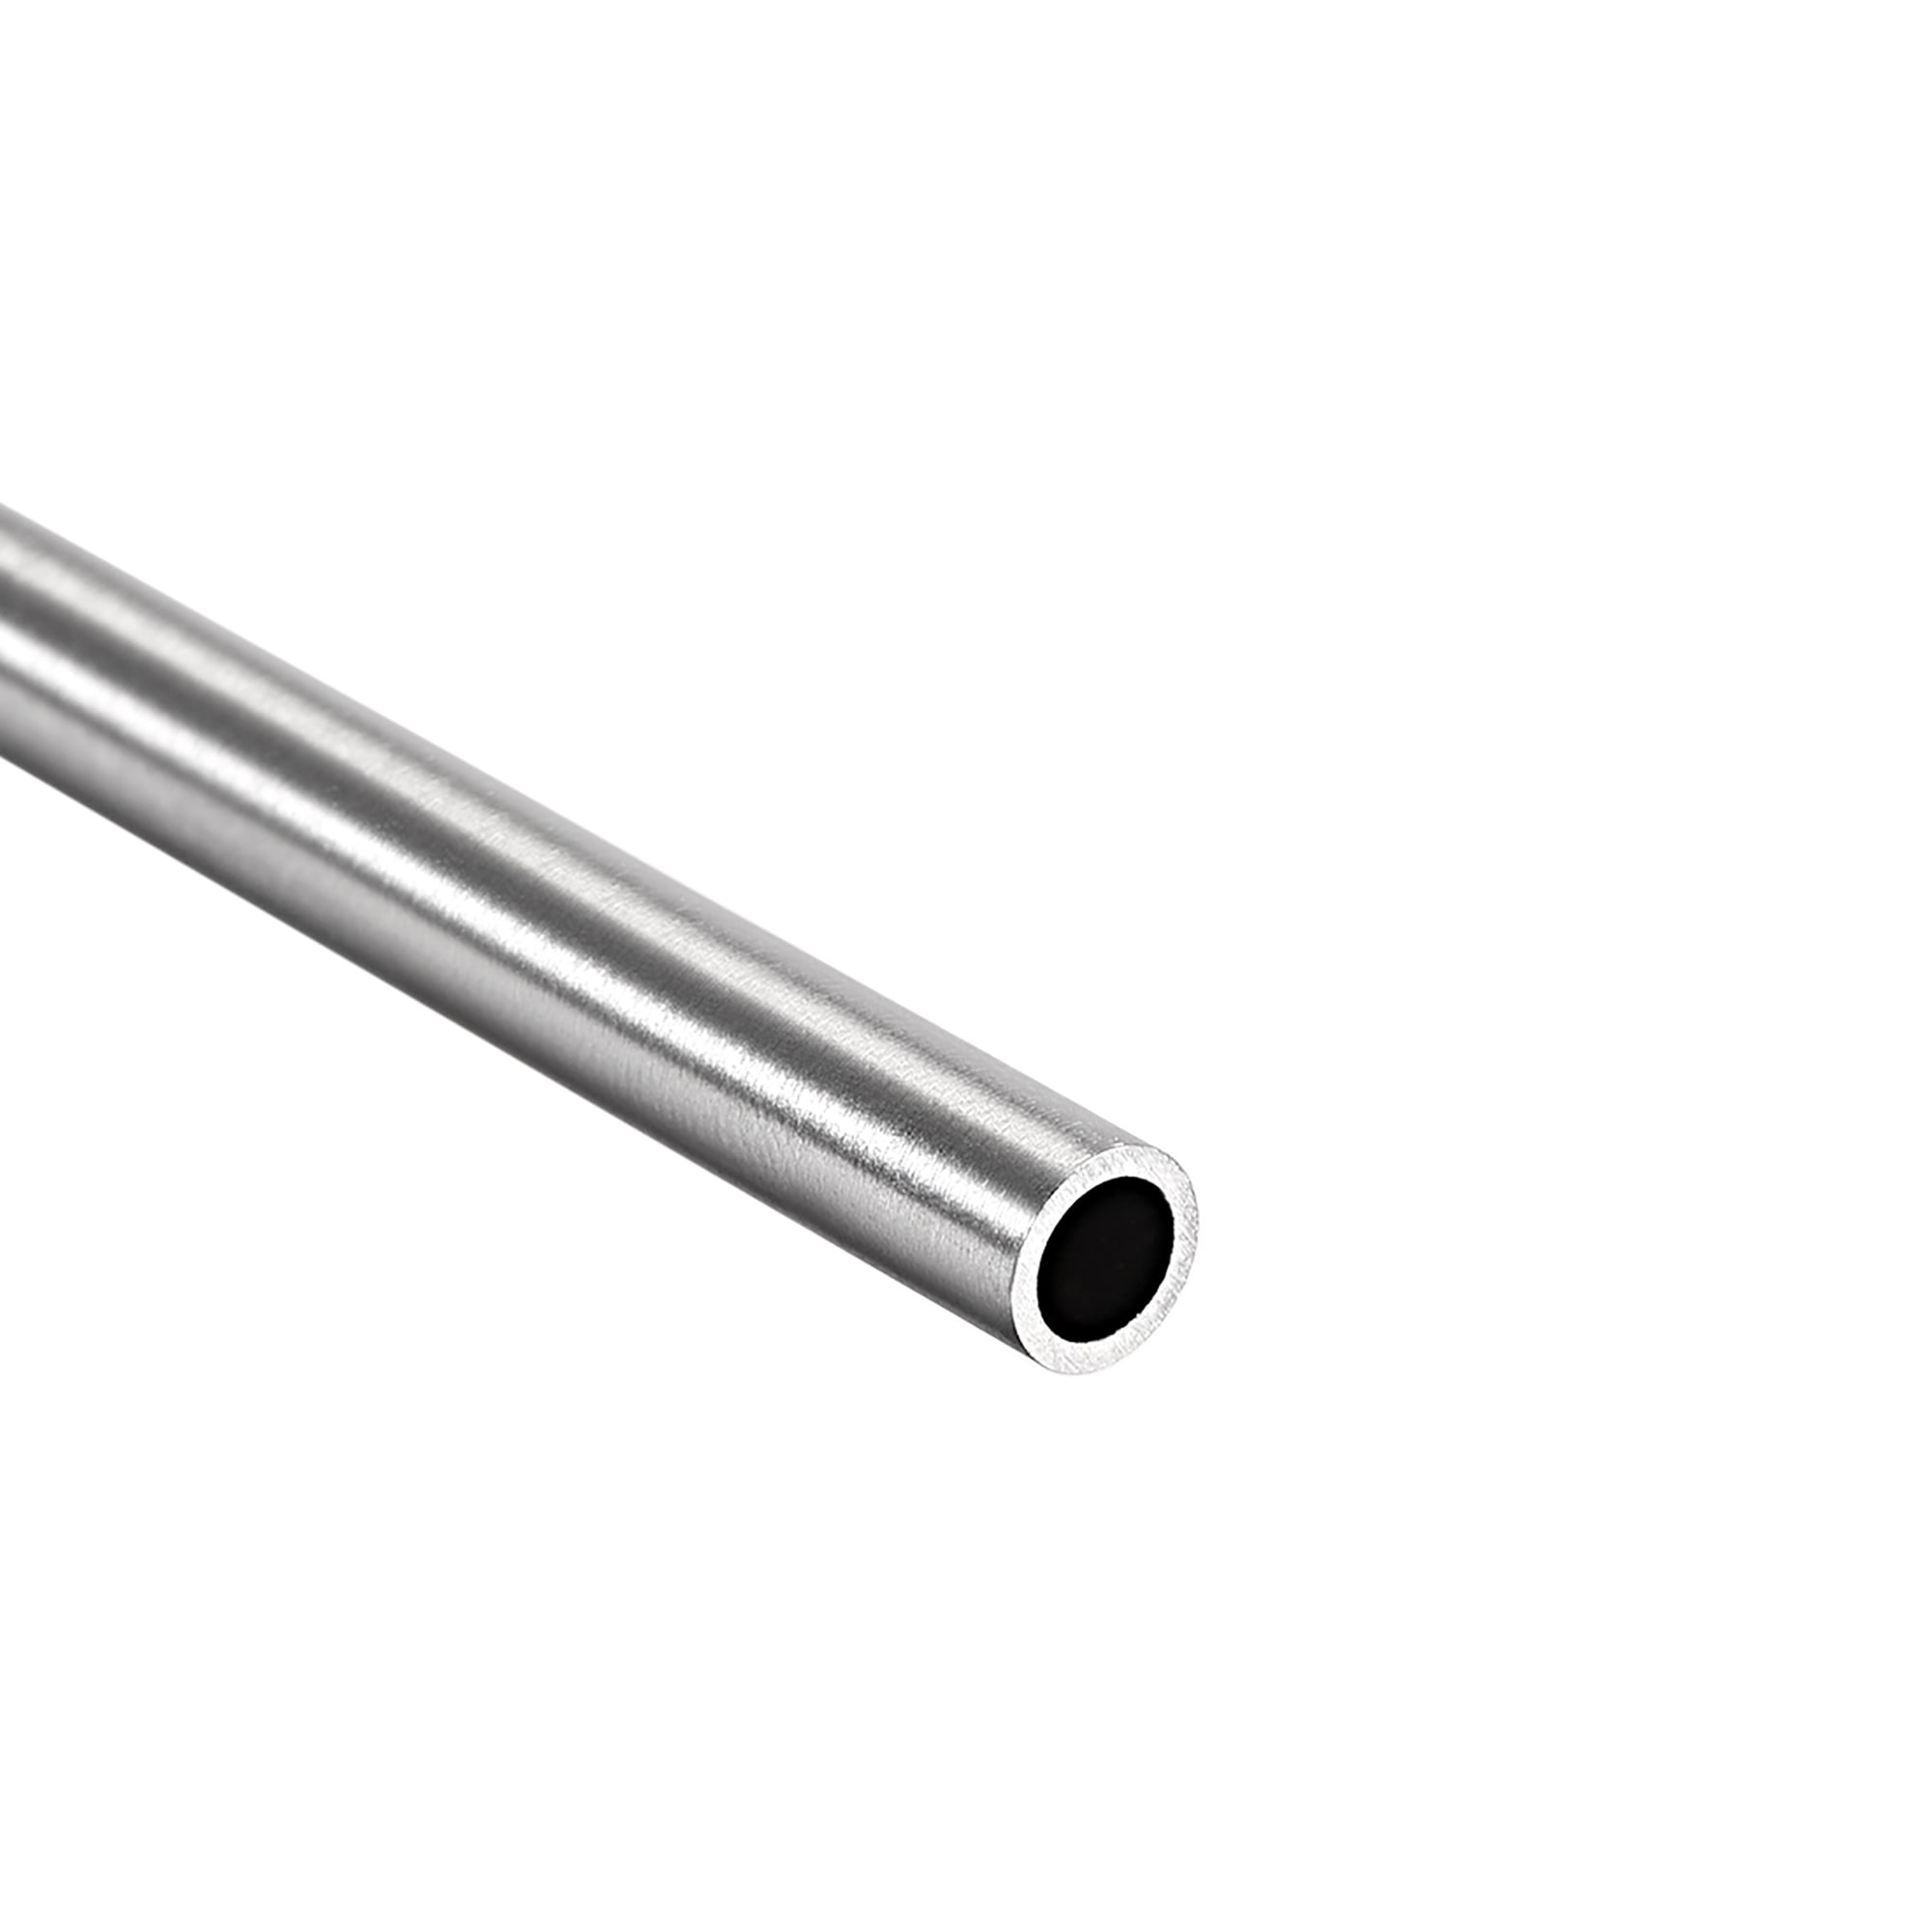 Round Stainless Steel Tube 304 6 mm OD 0.8 mm Wall Thickness 250 mm Length Seamless Straight Tube 4-Piece Tube 